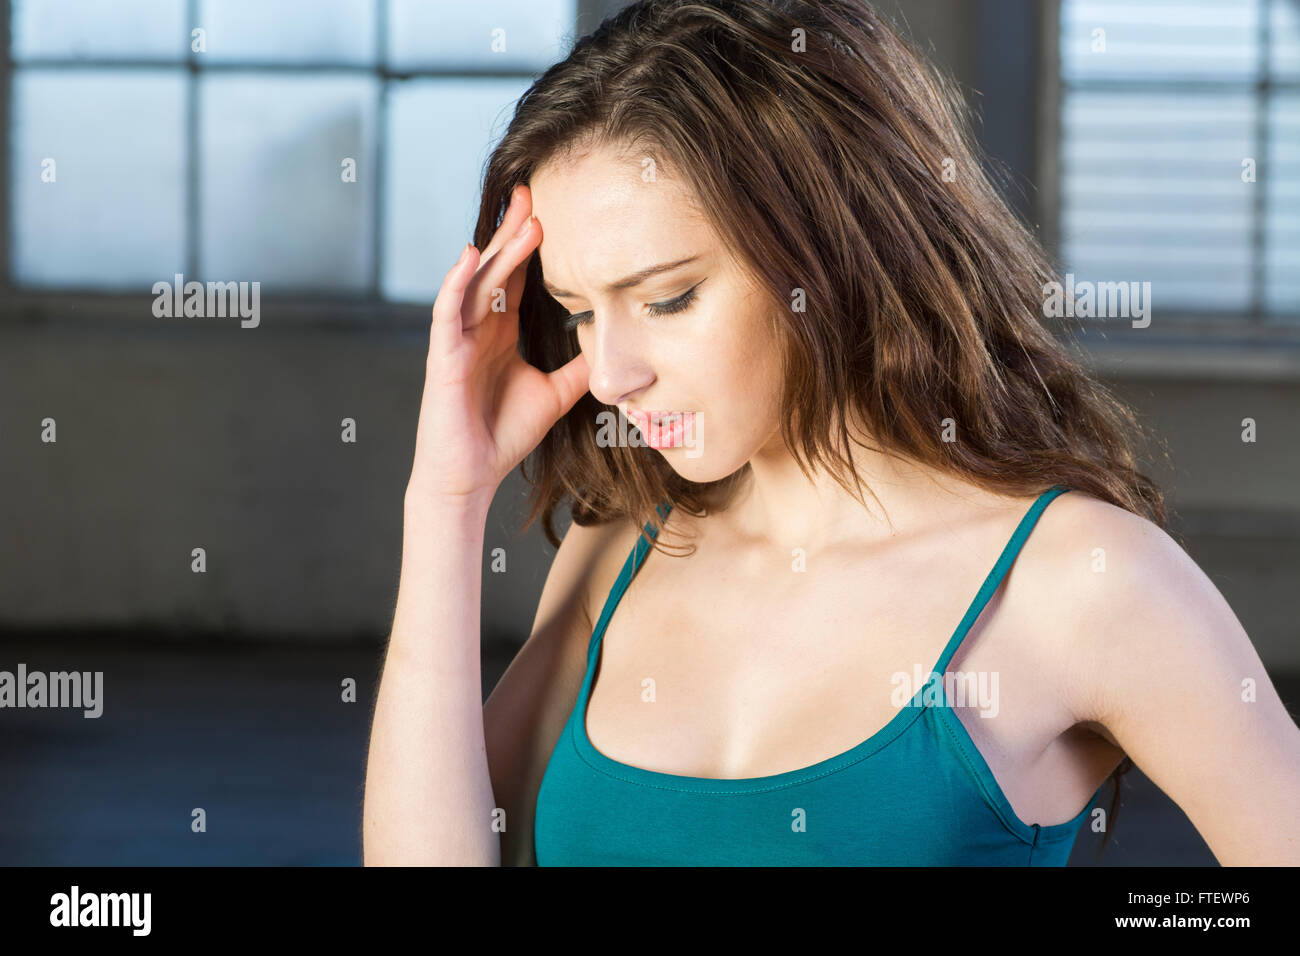 Young woman with a headache Stock Photo